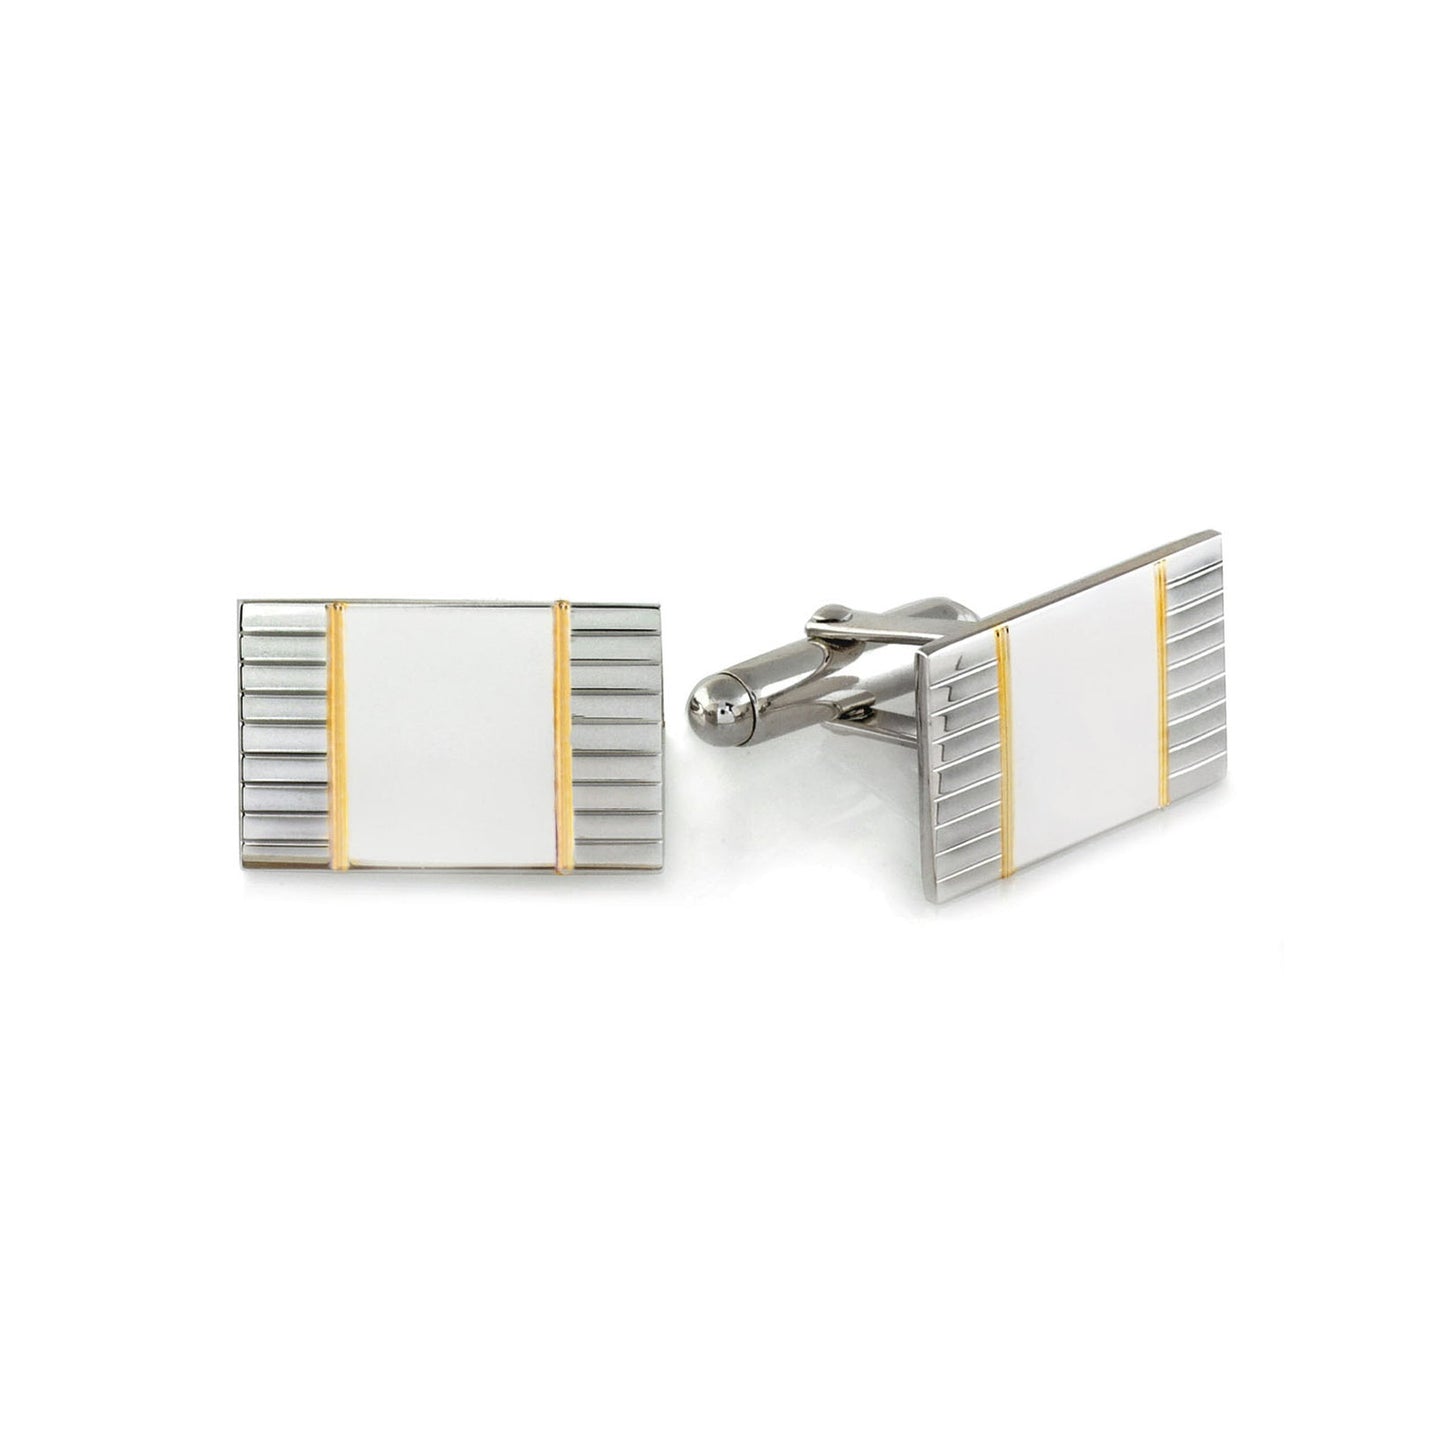 A sterling silver two color cufflinks displayed on a neutral white background.